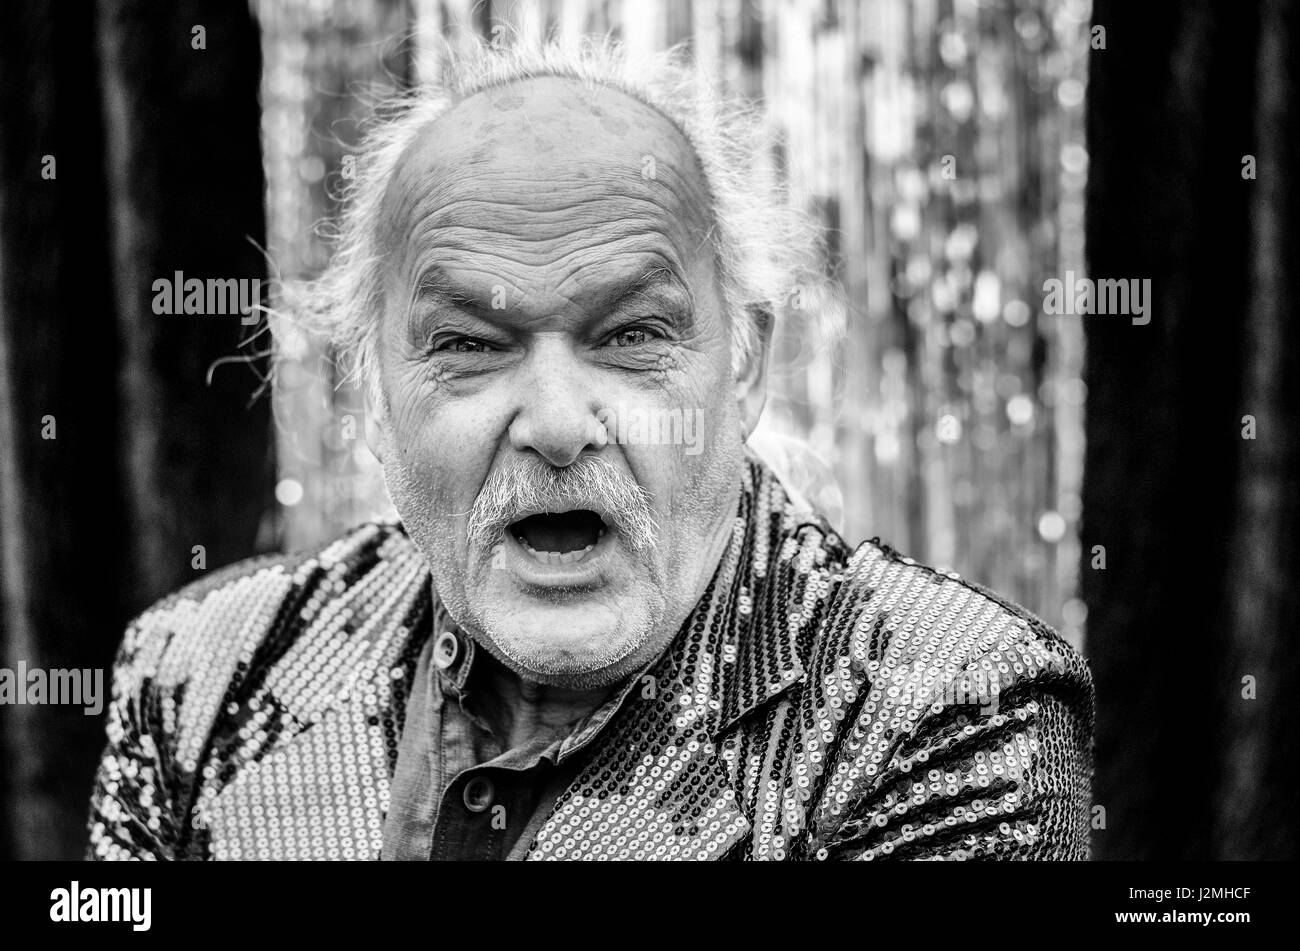 Infuriated elderly man shouting at the camera with an angry expression and baleful stare in a head and shoulders toned greyscale image Stock Photo